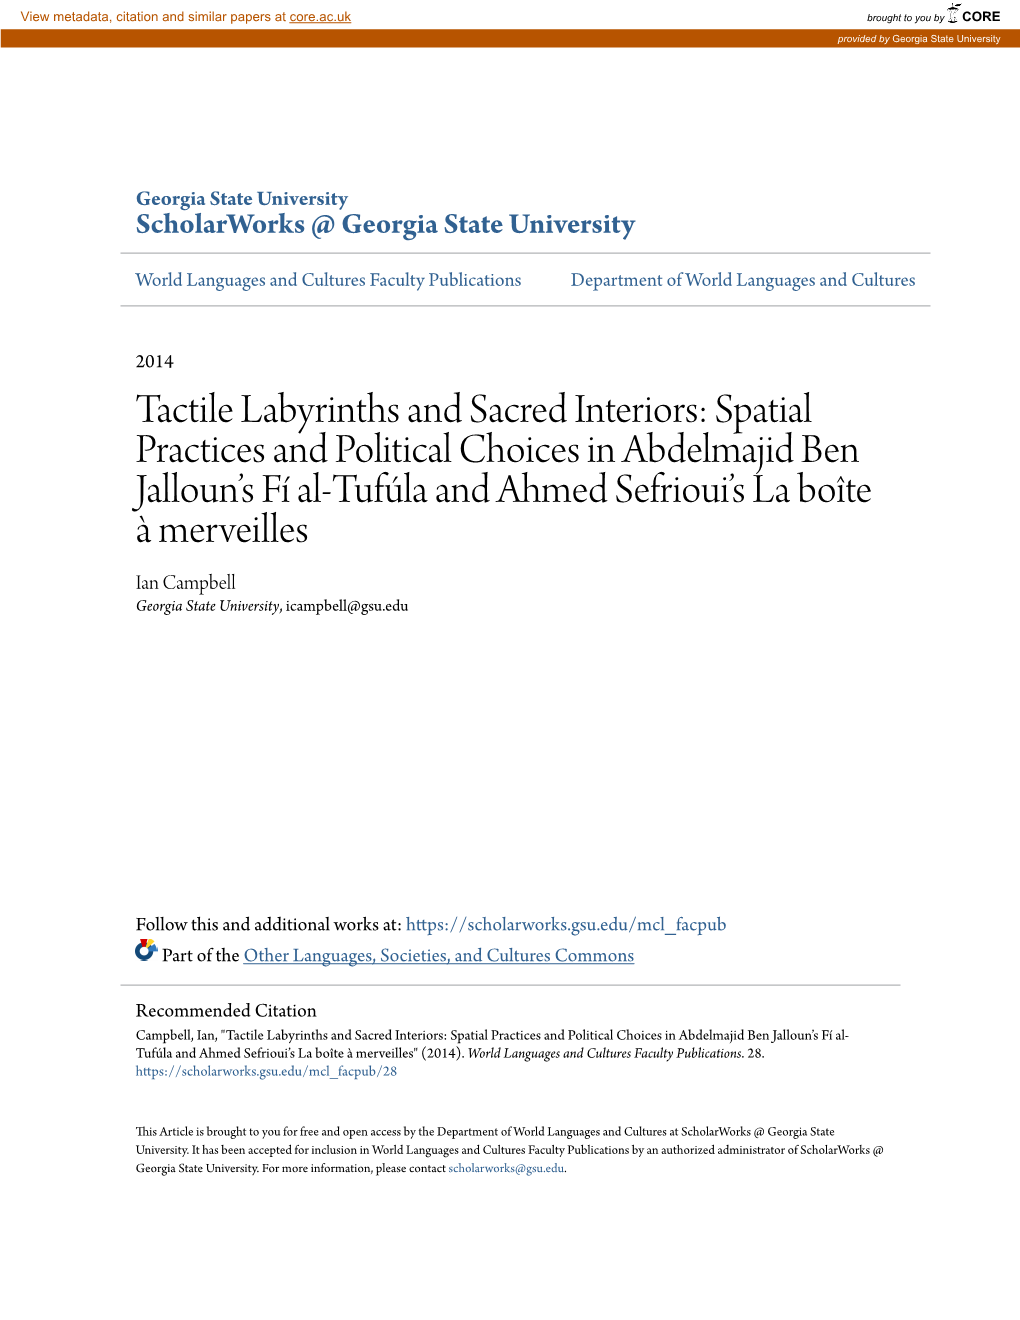 Tactile Labyrinths and Sacred Interiors: Spatial Practices and Political Choices in Abdelmajid Ben Jallounâ•Žs FÃŁ Al-Tuf